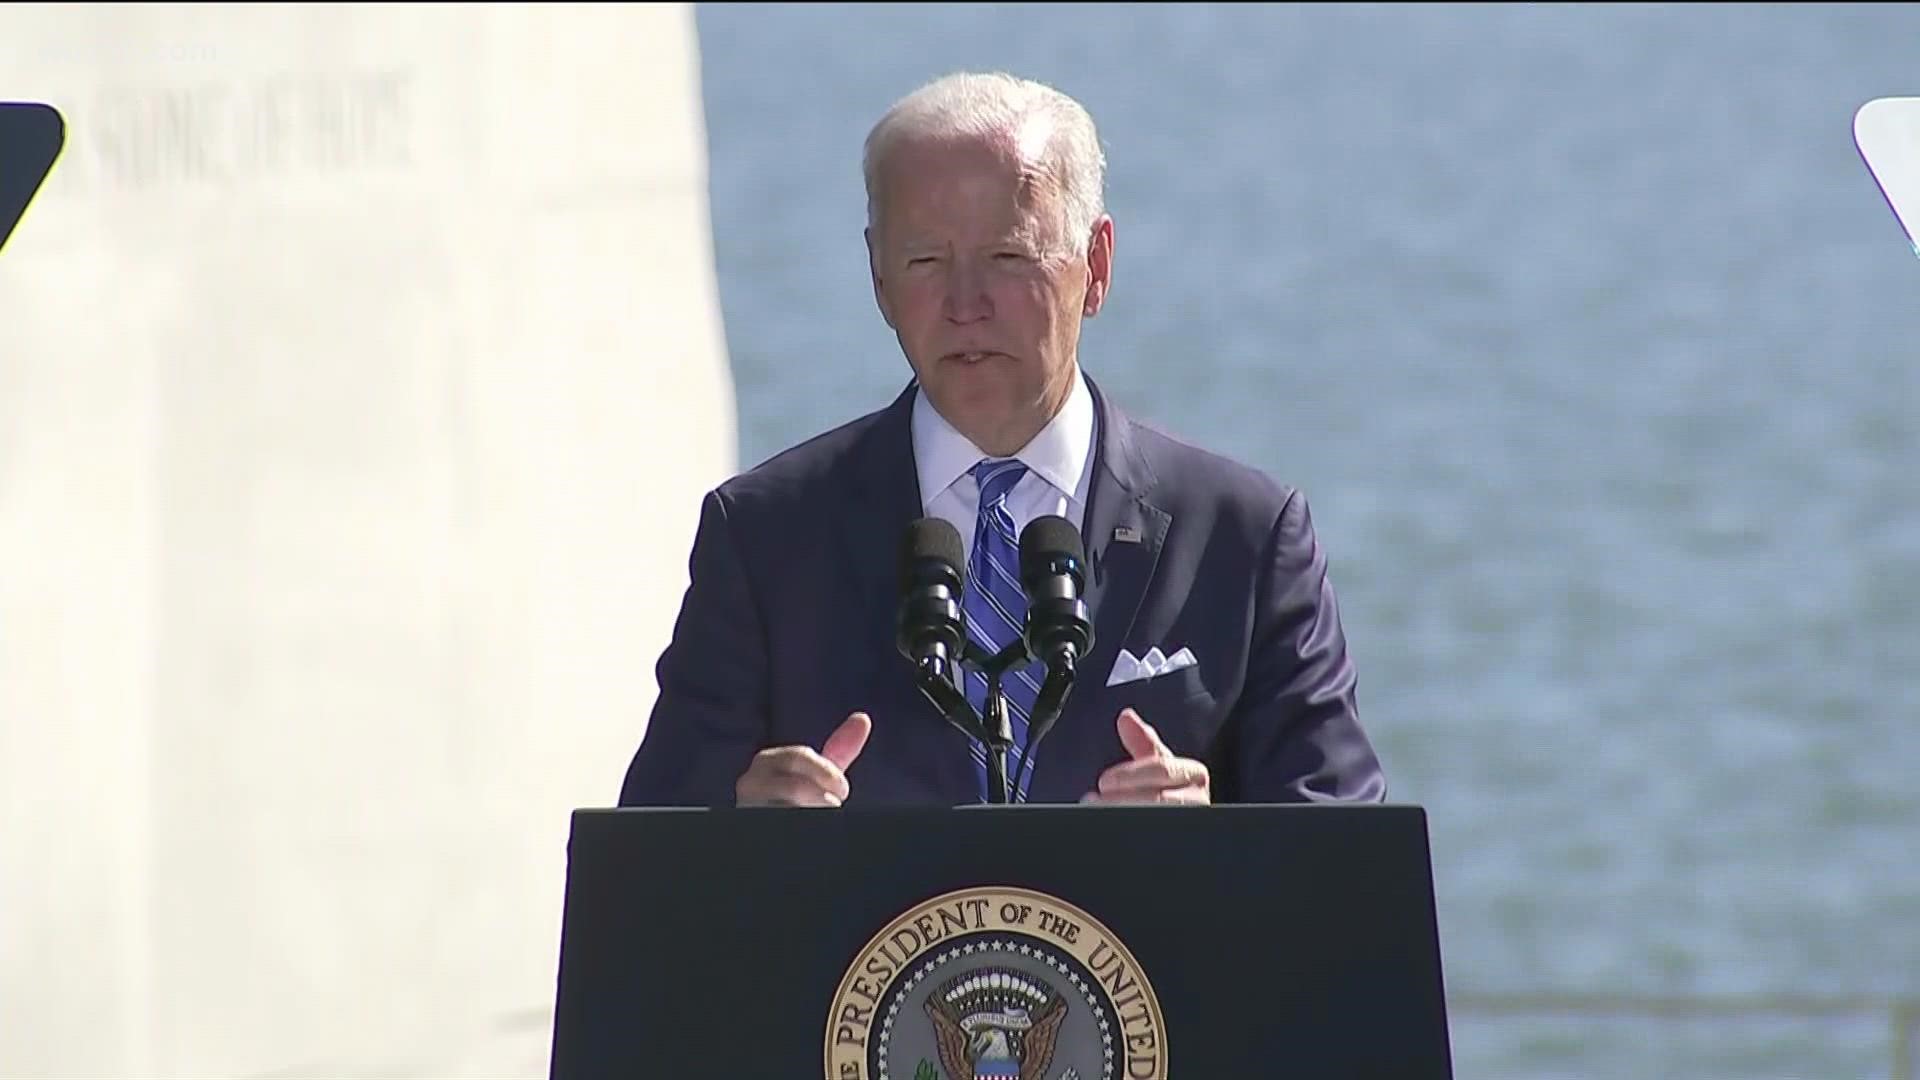 Leaders from across the country, including President Joe Biden and Vice President Kamala Harris, are attending the Anniversary Commemoration.